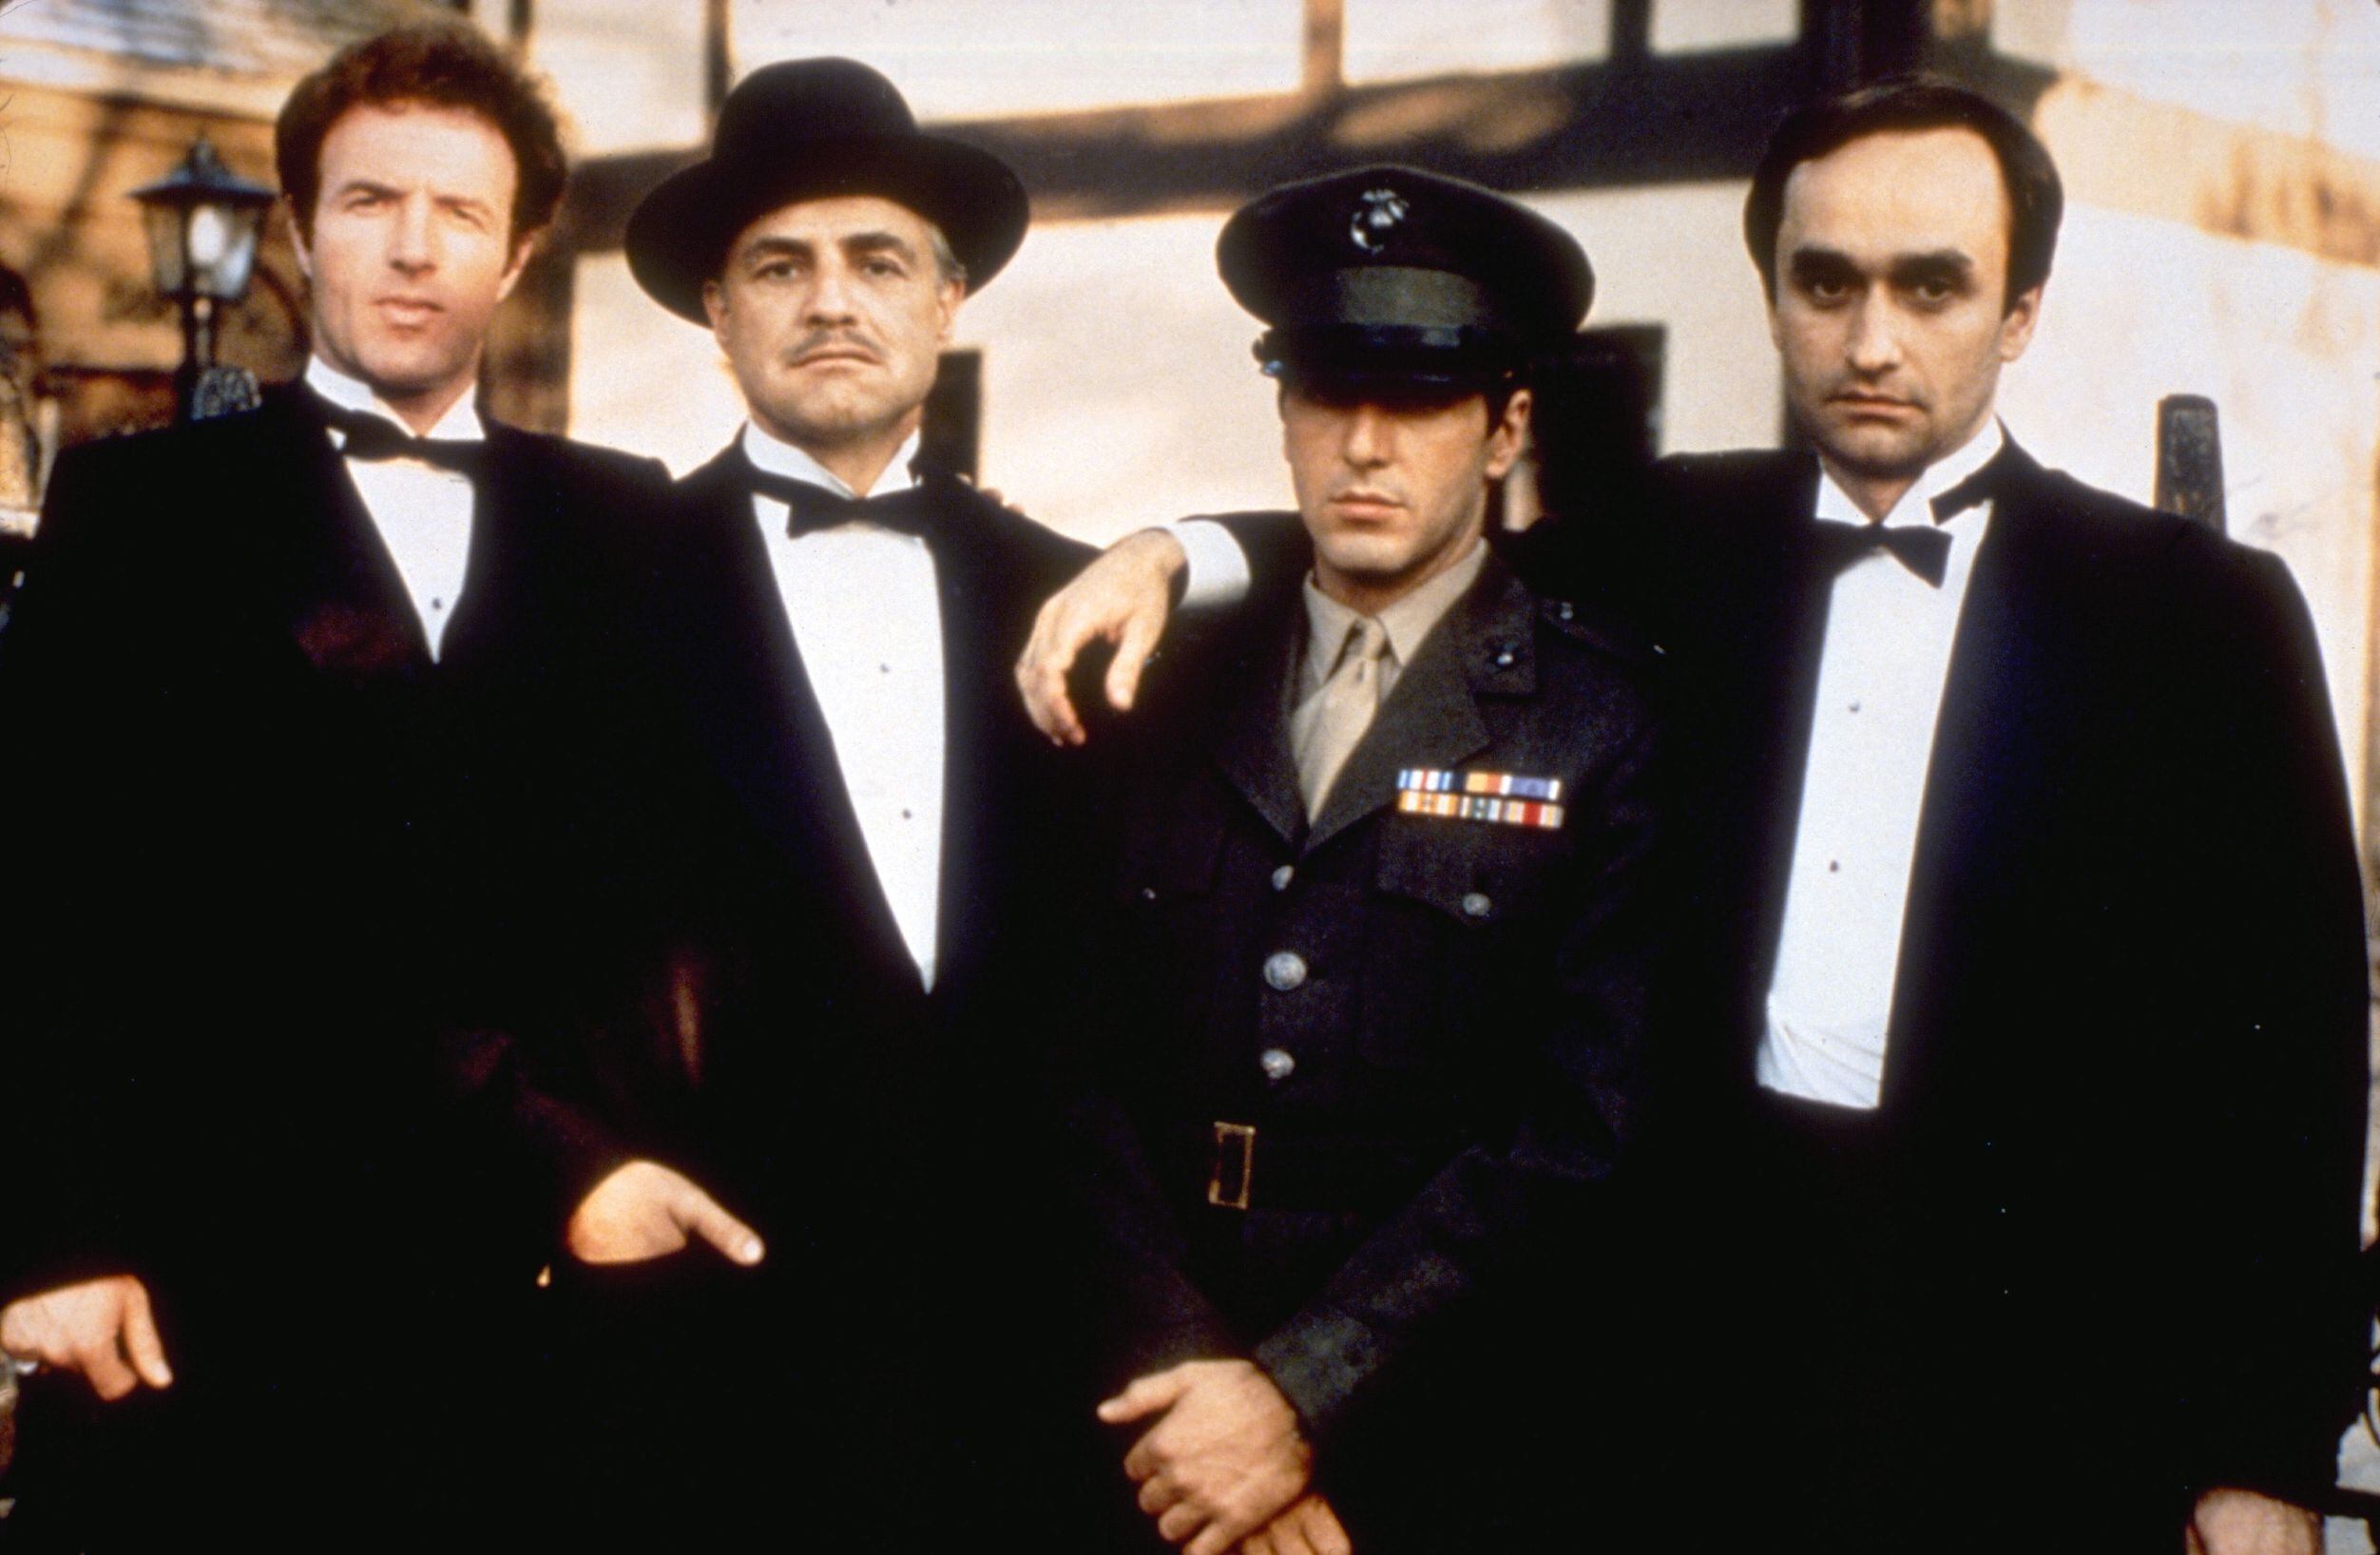 Godfather Part 3 edit from Francis Ford Coppola heading to theaters